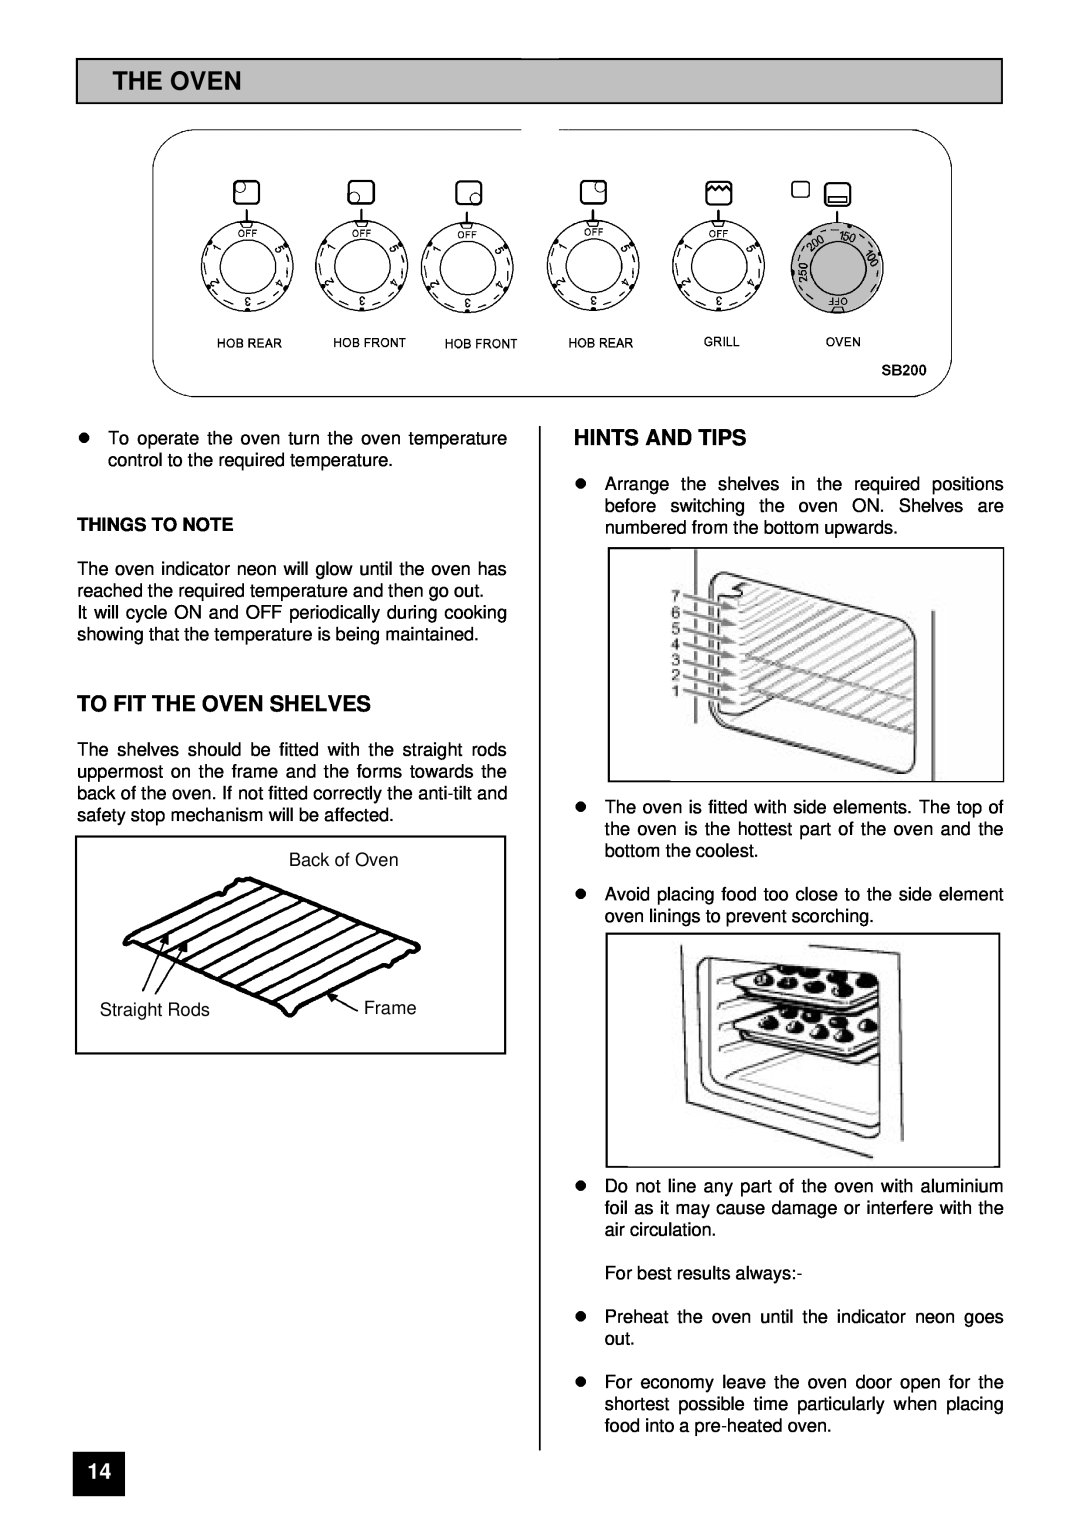 Tricity Bendix SB 200 installation instructions To Fit The Oven Shelves, lHINTS AND TIPS, Things To Note 